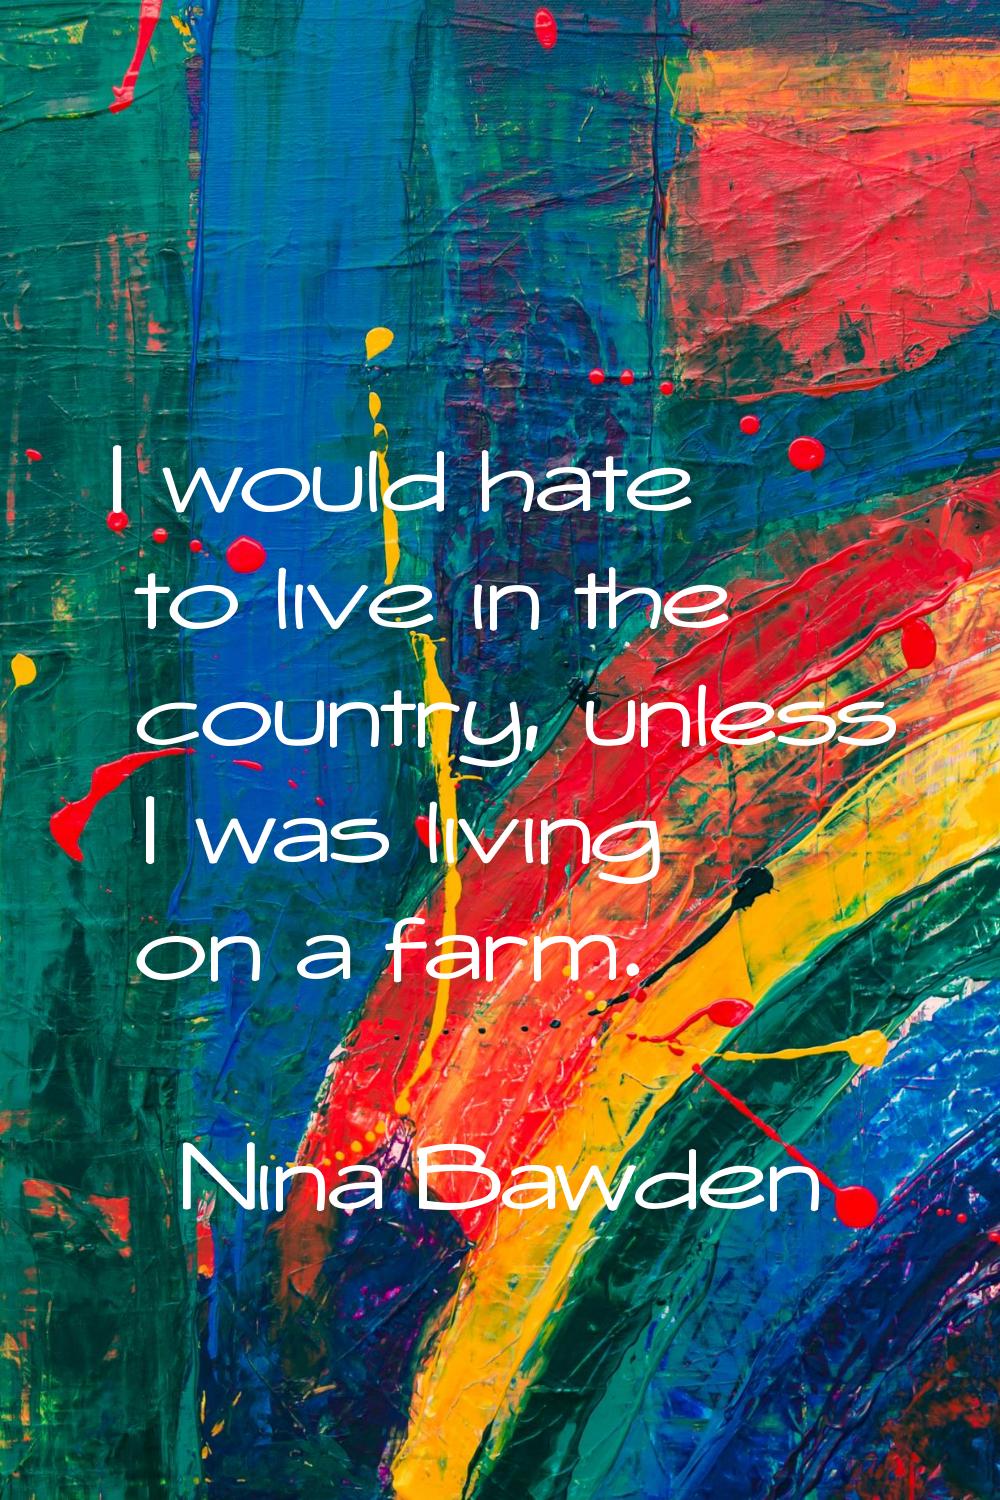 I would hate to live in the country, unless I was living on a farm.